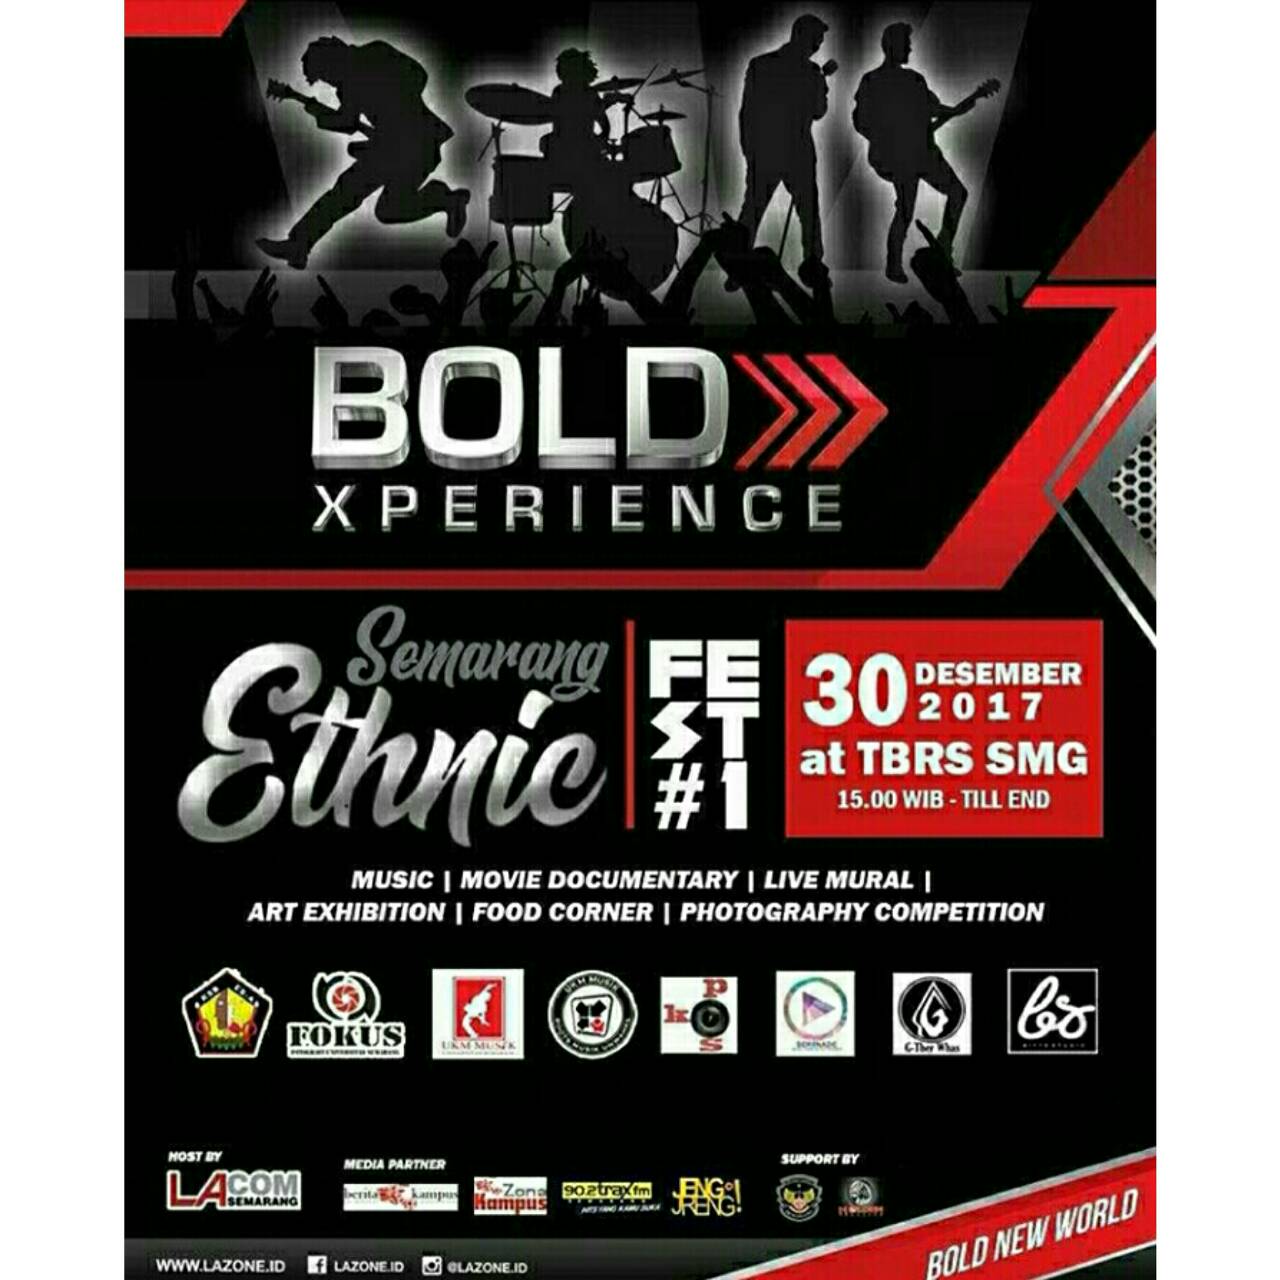 BOLD XPERIENCE